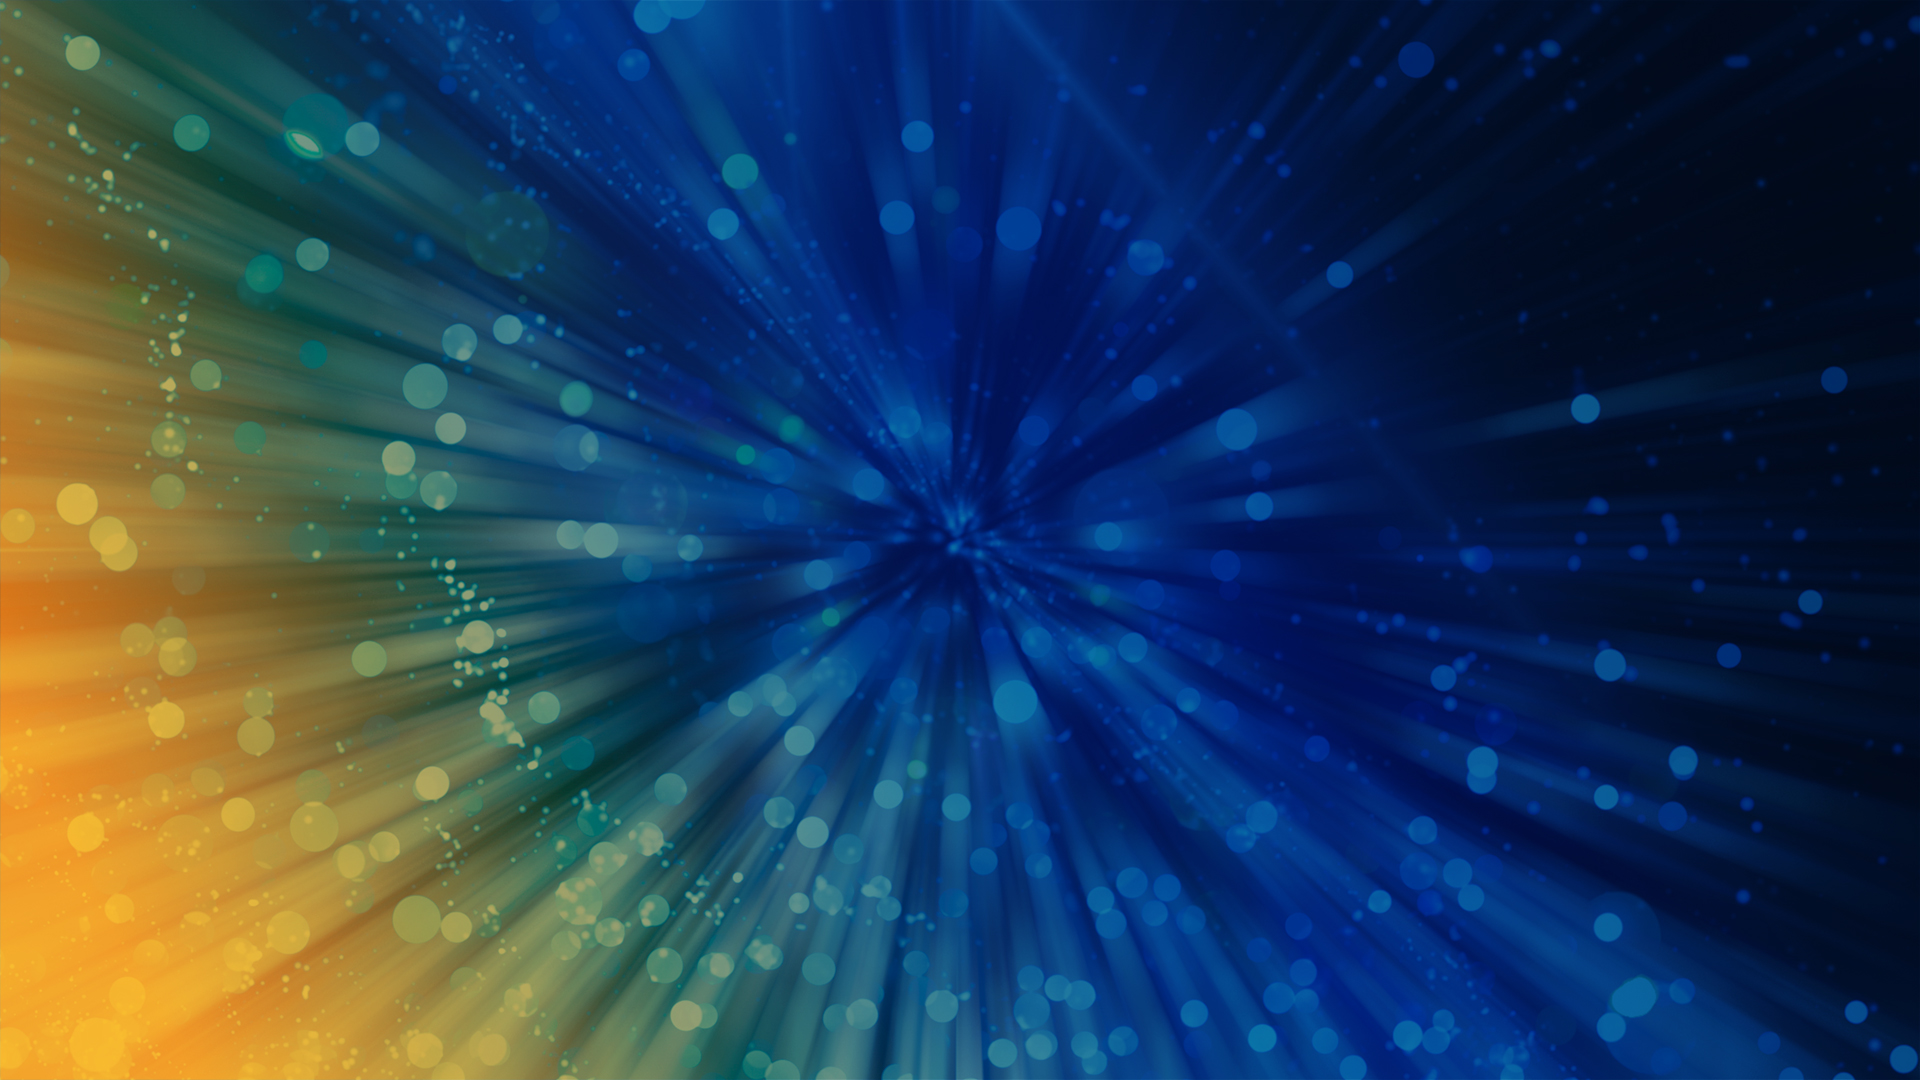 Abstract blue background star explosion TIS webinar article